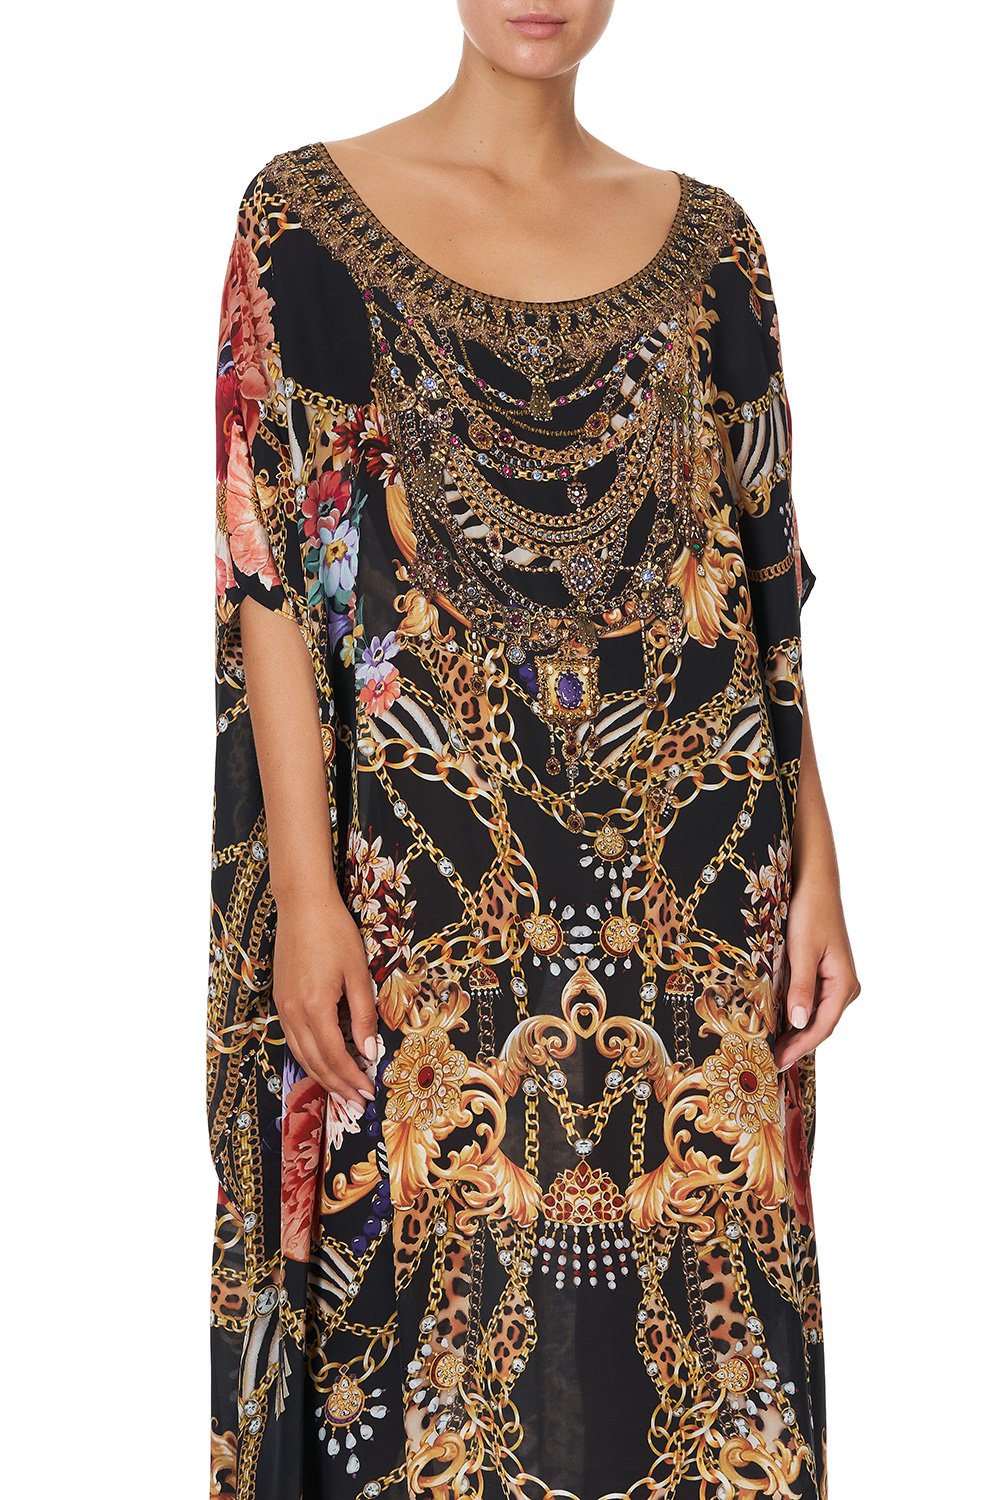 ROUND NECK KAFTAN A NIGHT IN THE 90S